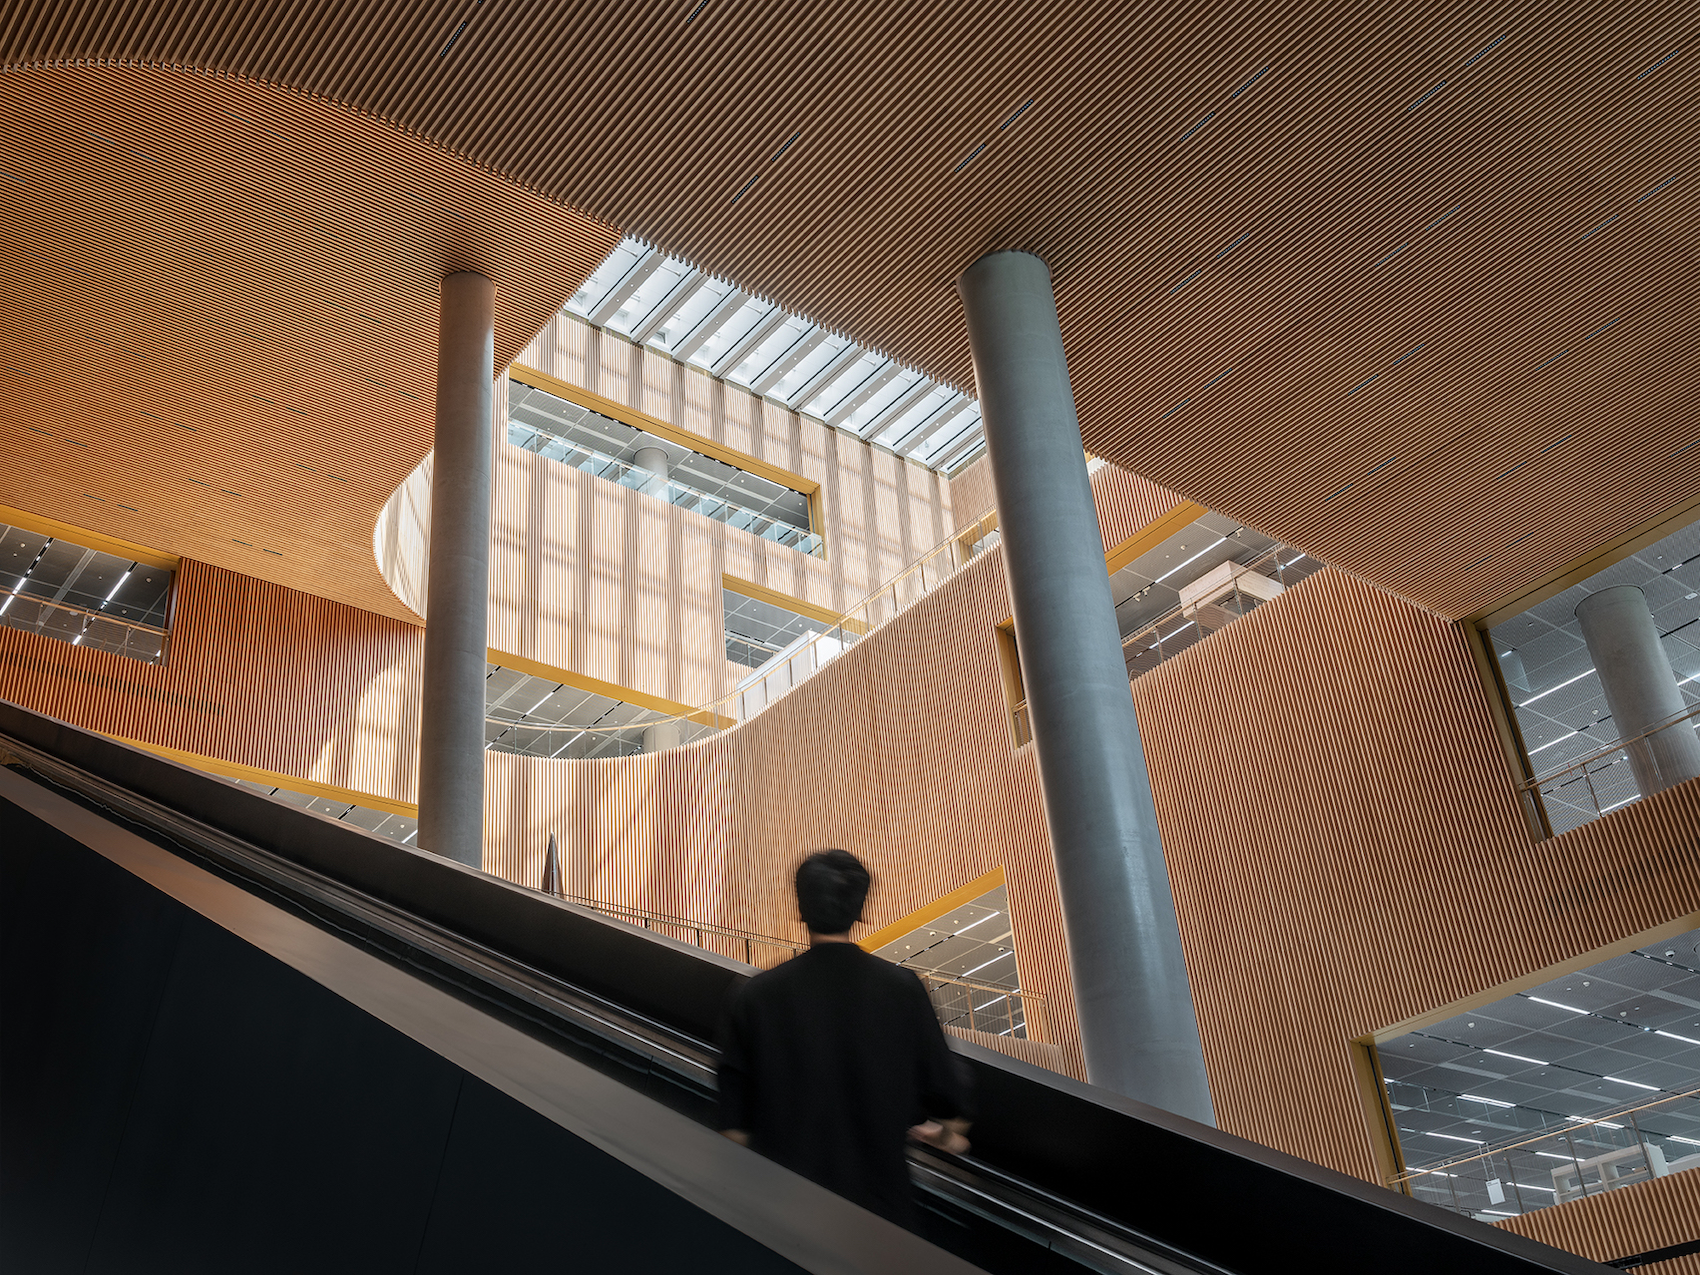 An expansive atrium connects the library's seven floors. Credit Tian Fangfang